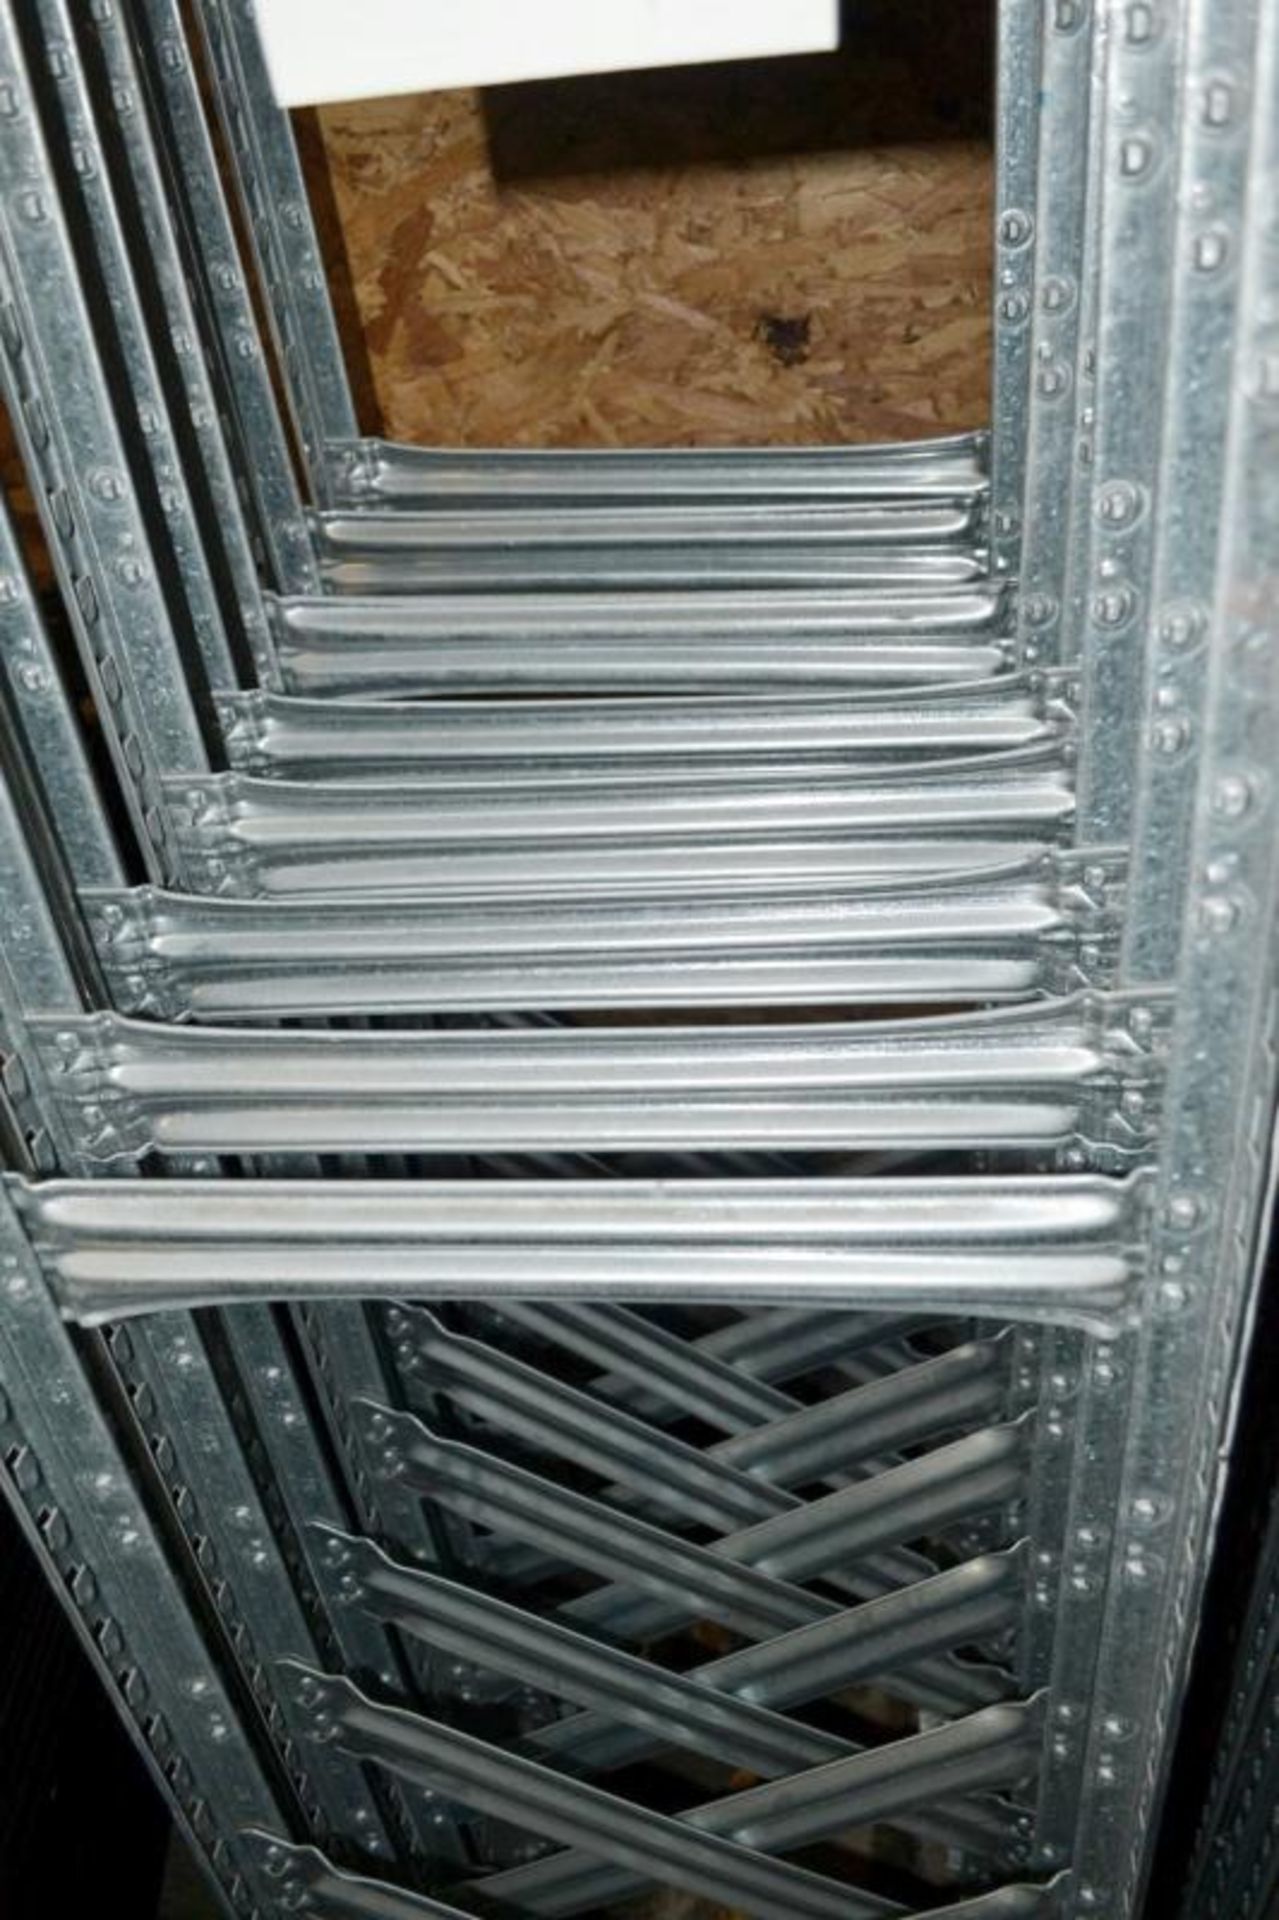 4 x Bays of Metalsistem Steel Modular Storage Shelving - Includes 37 Pieces - Recently Removed - Image 15 of 17